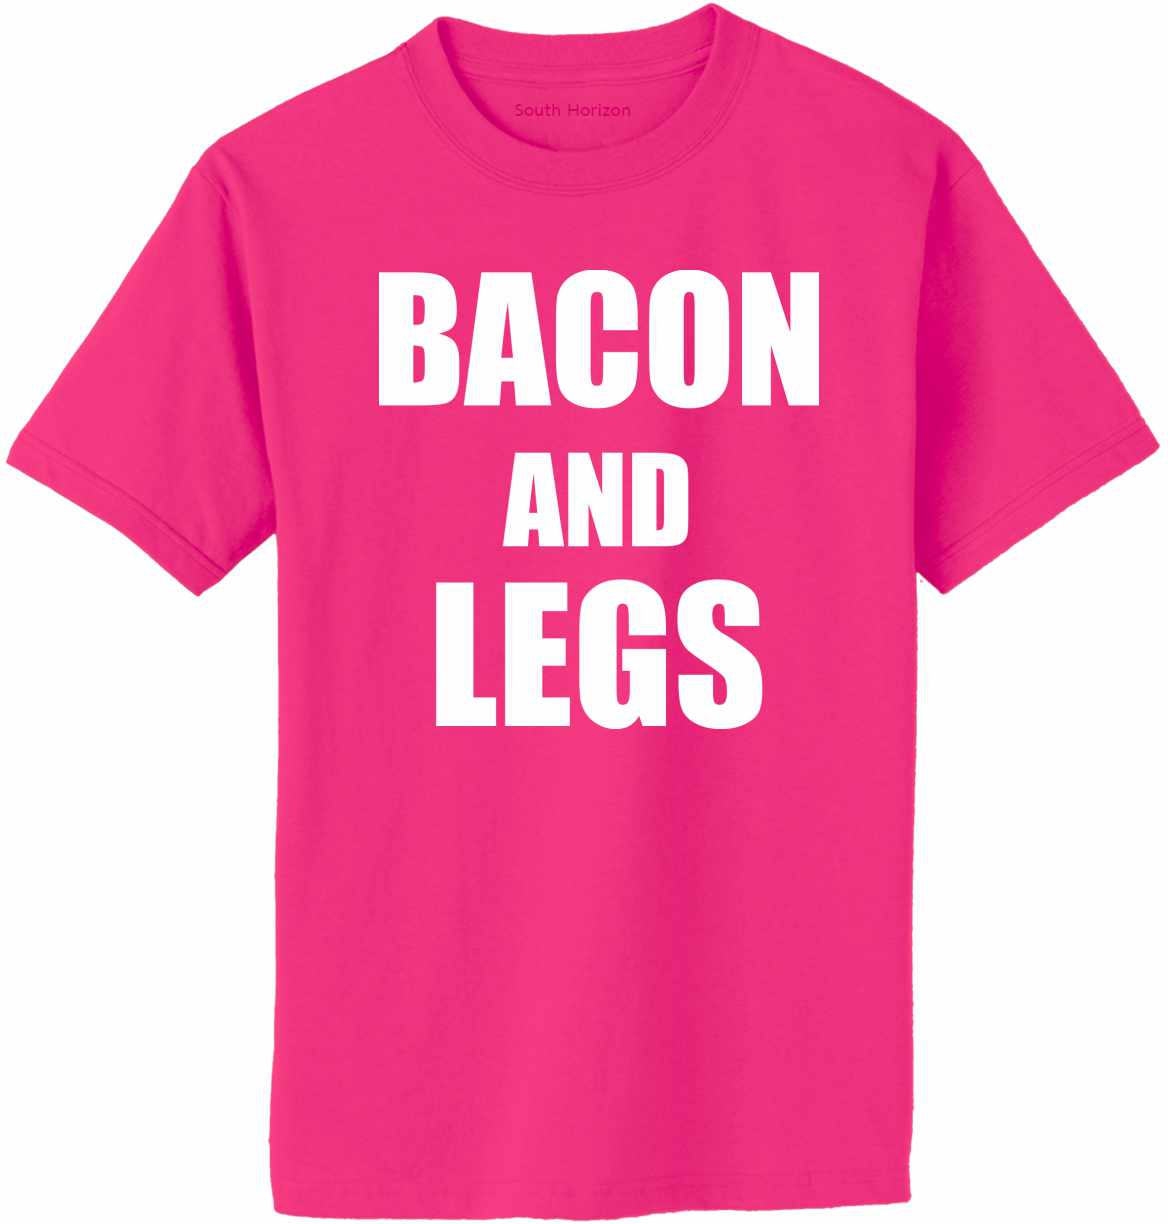 Bacon And Legs Adult T-Shirt